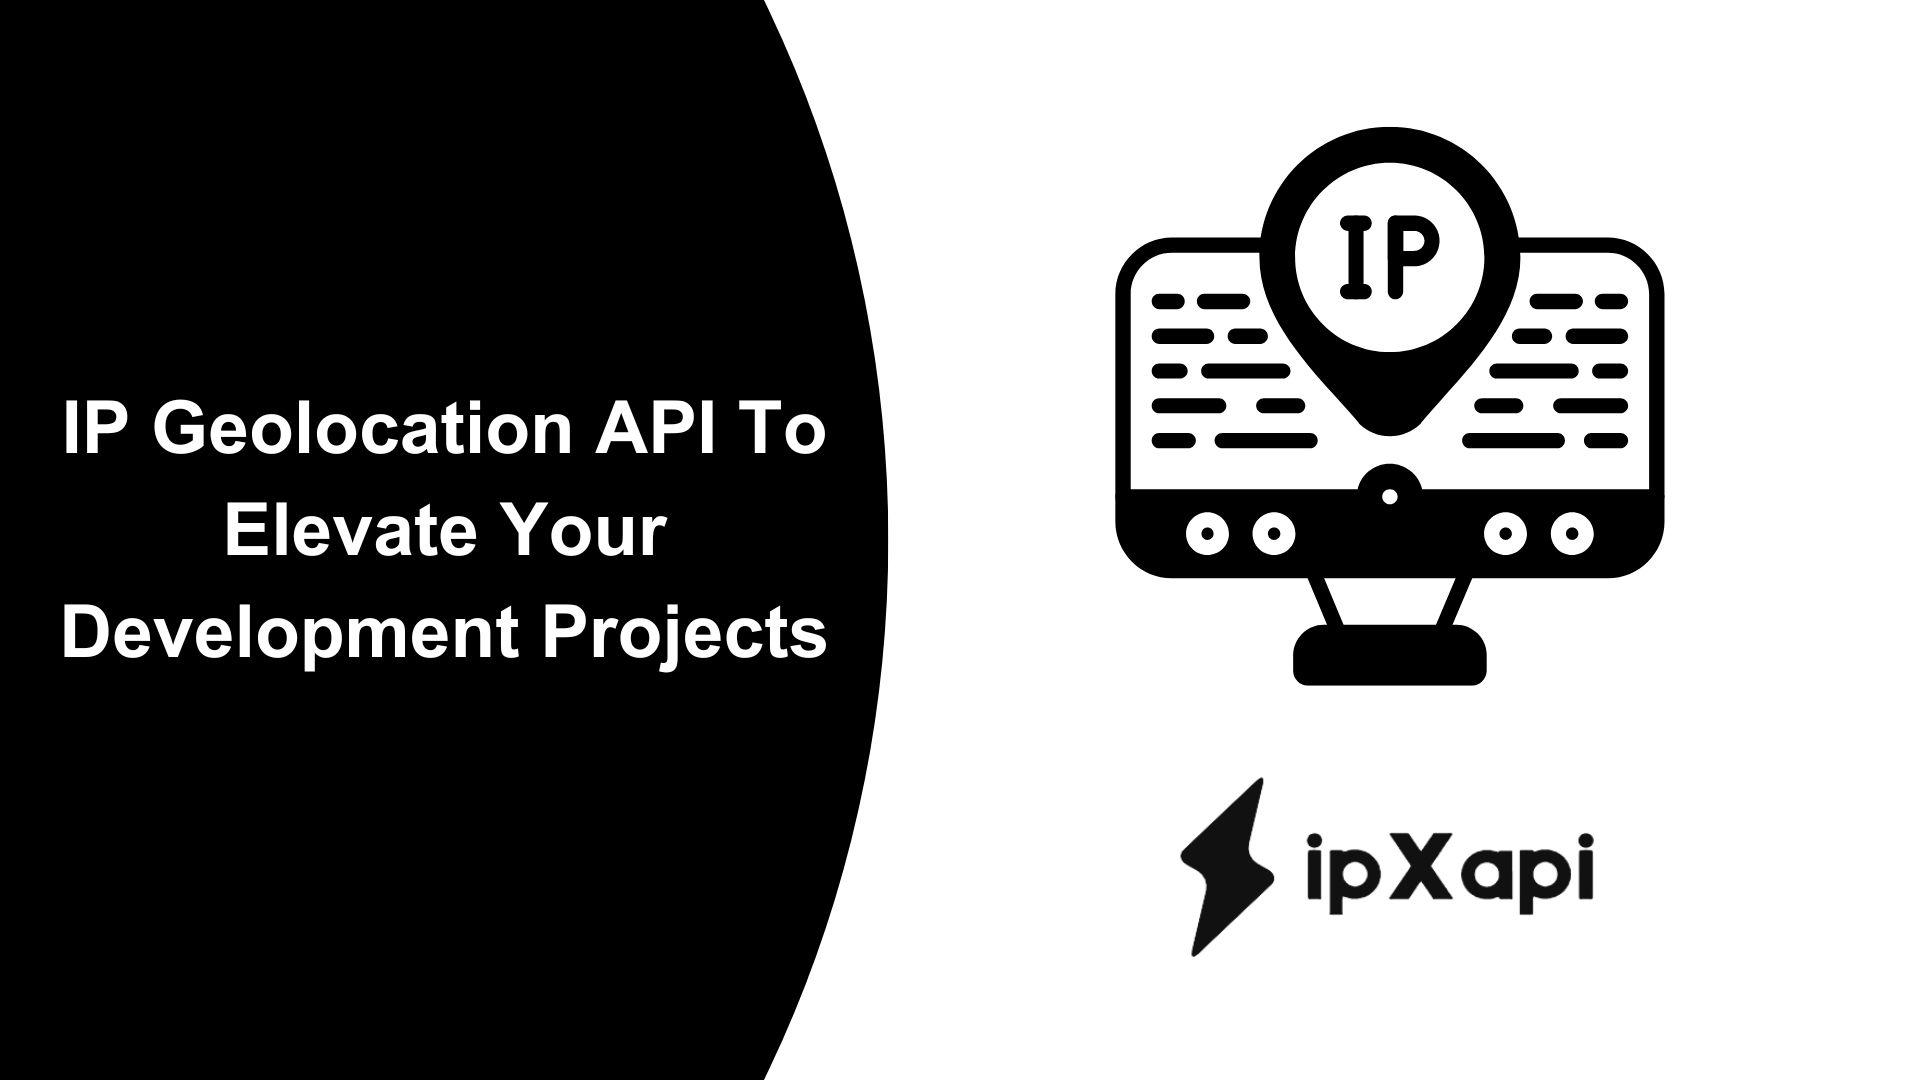 IP Geolocation API To Elevate Your Development Projects